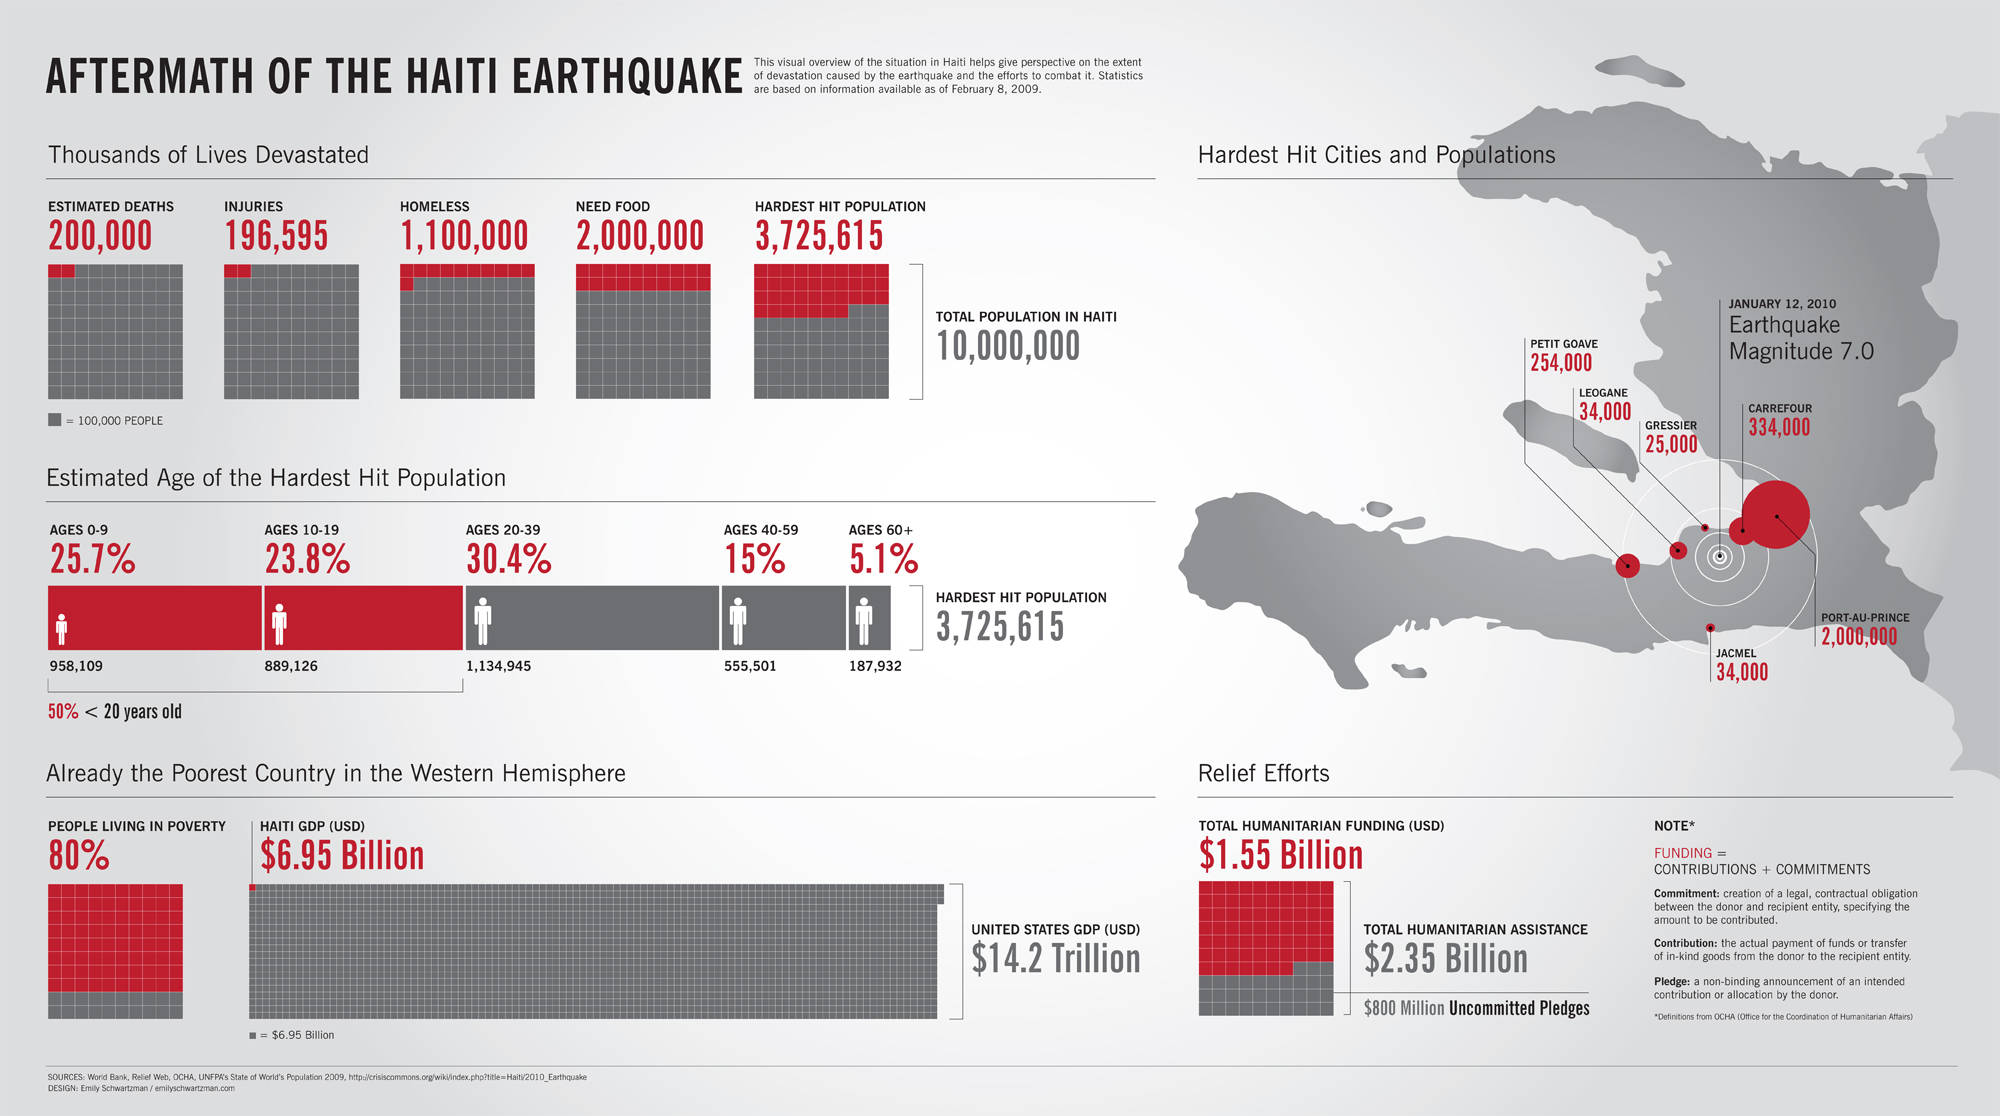 On January 12, 2010, a magnitude 7.0 Mw tremor struck the Haitian coast 10 miles from the capital of Port-au-Sovereign, initiating colossal harm, more than 200,000 demises and dislodging practically […]